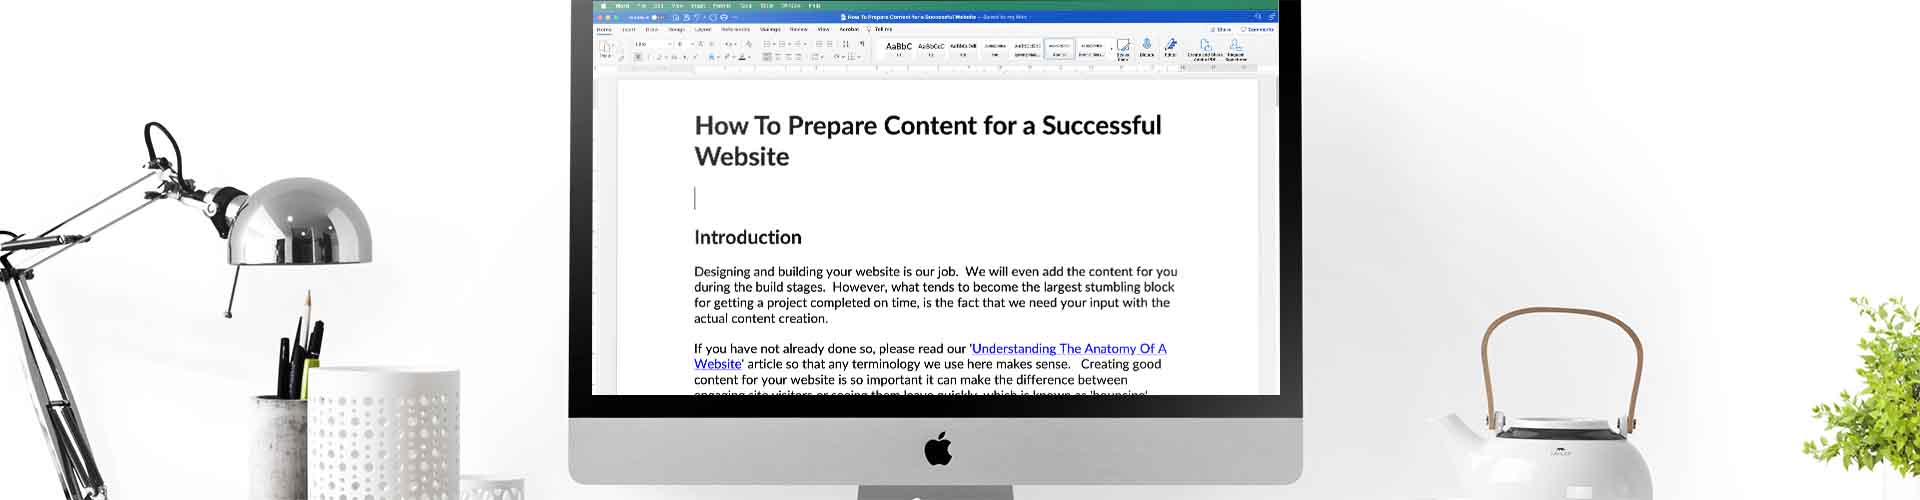 How To Prepare Content For A Successful Website